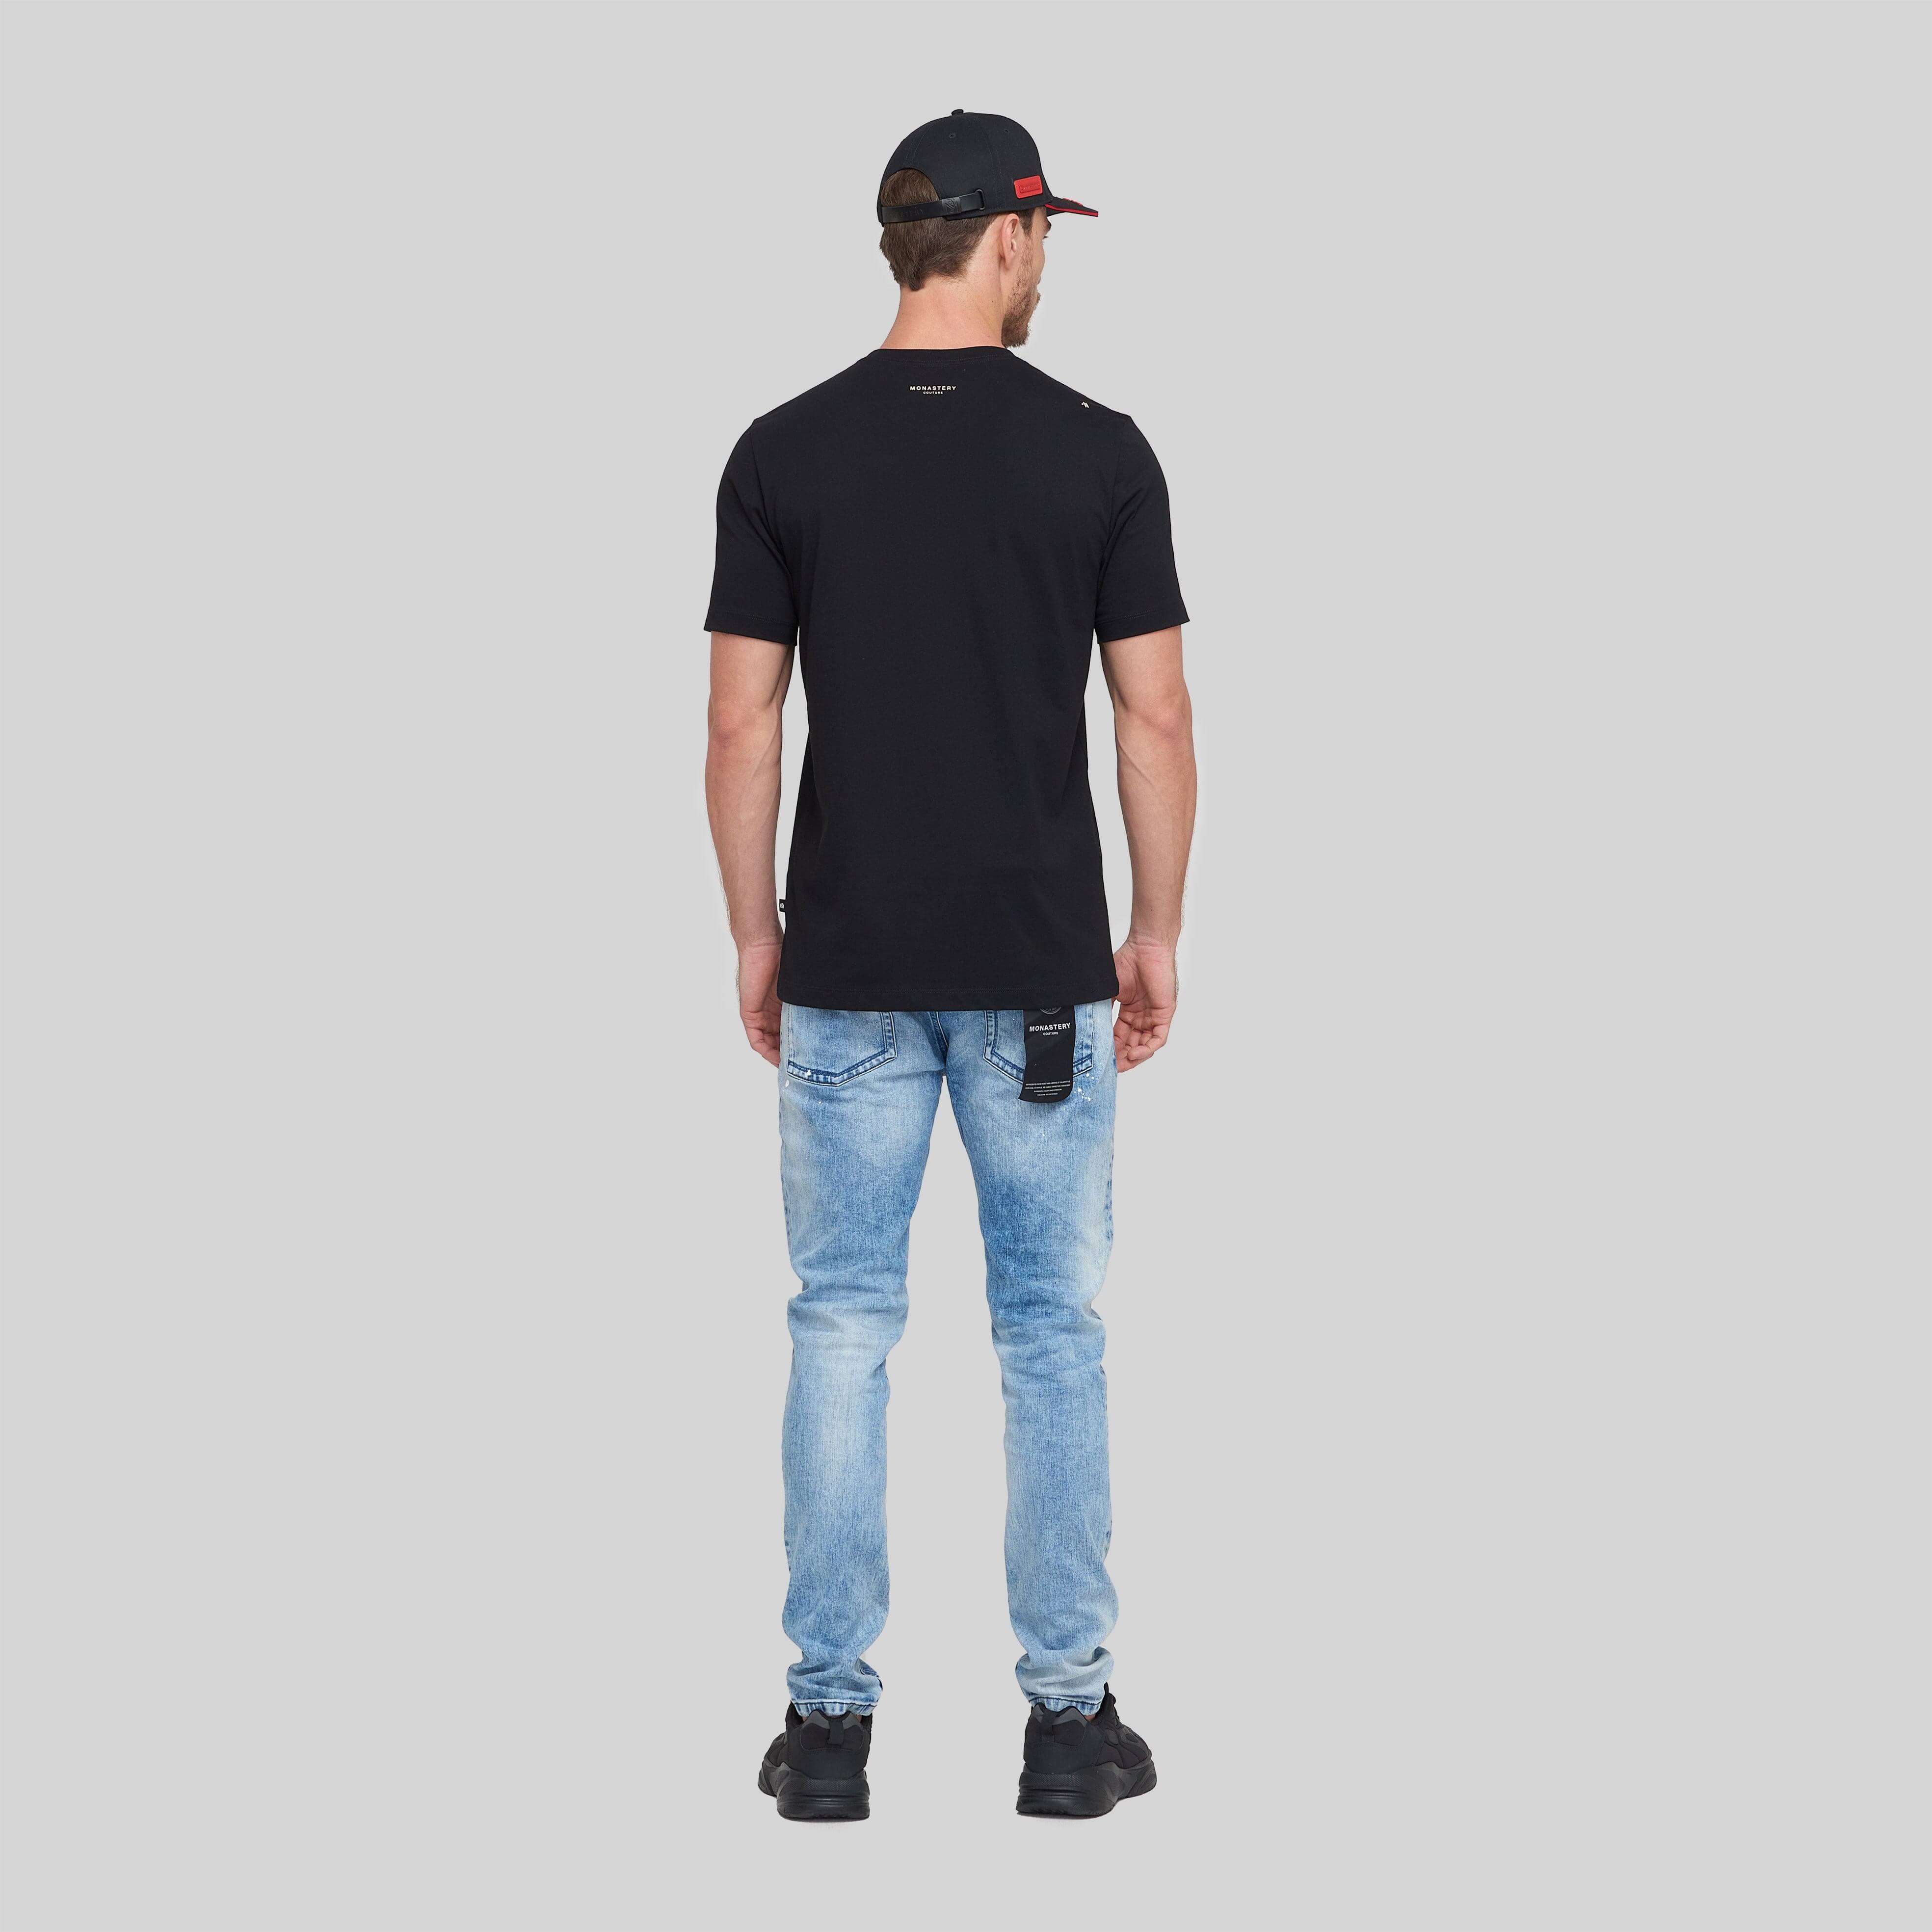 ARTY BLACK T-SHIRT | Monastery Couture